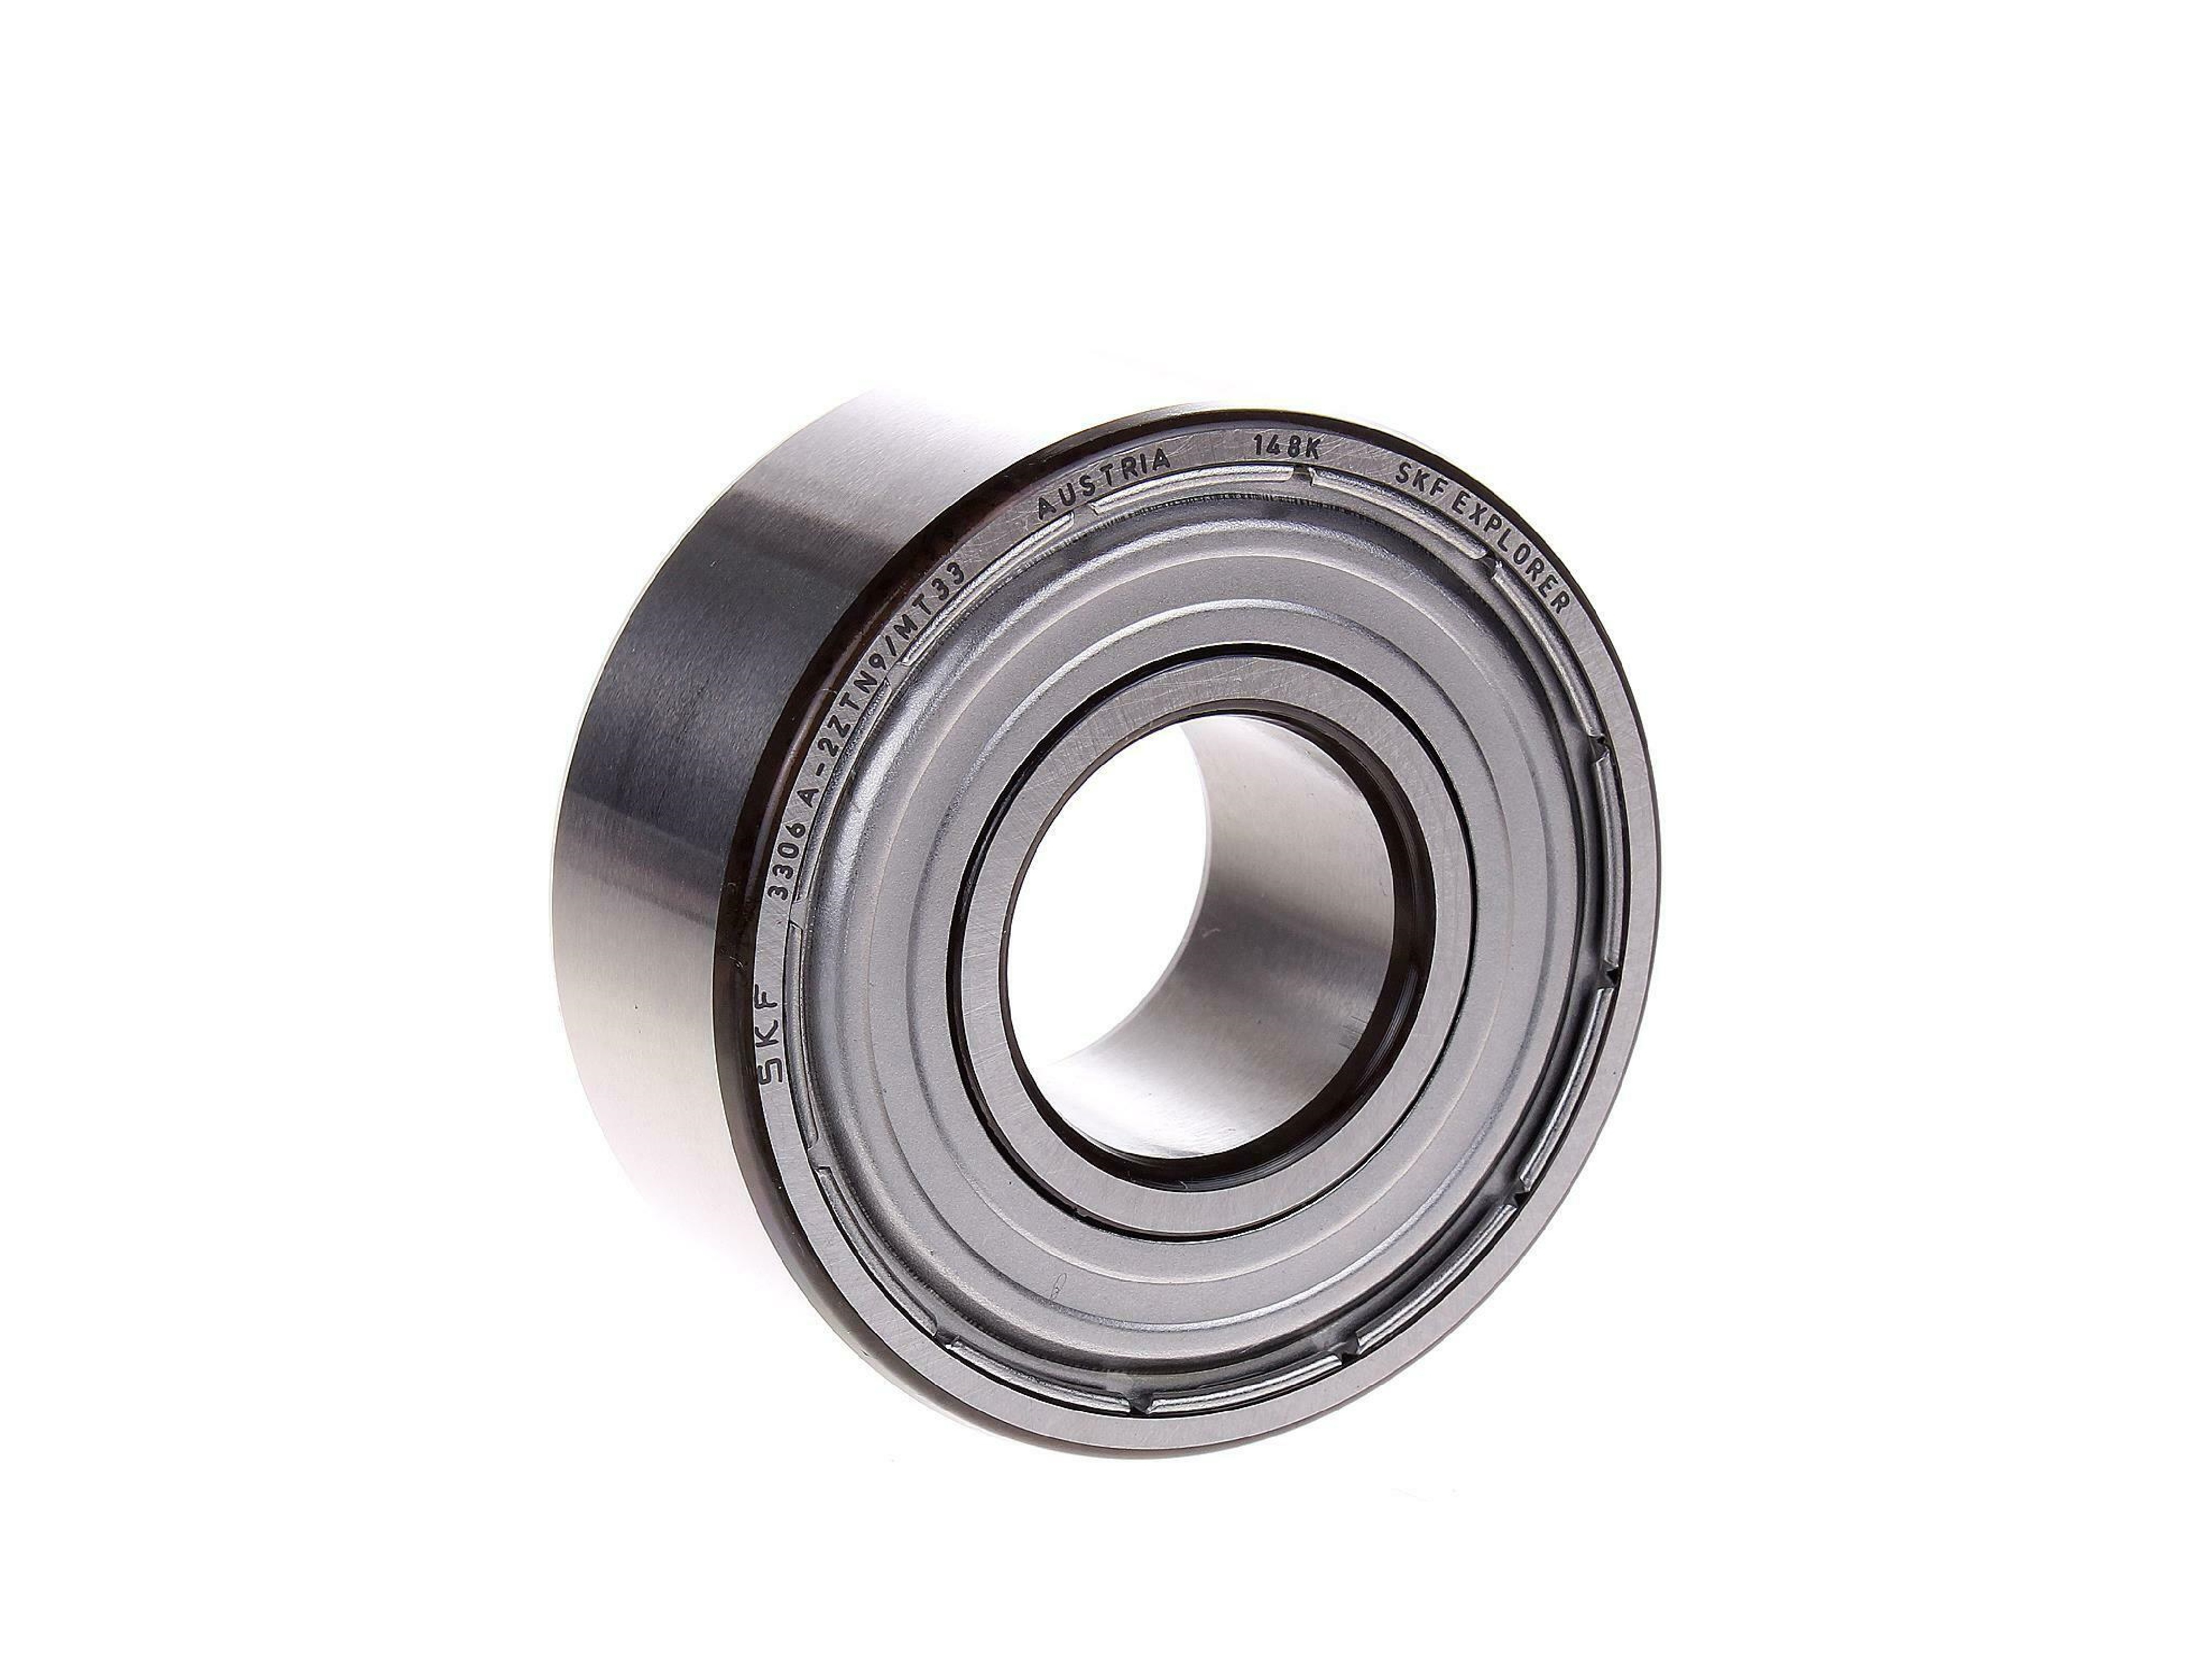 3204A-2ZTN9/MT33 SKF Double Row Angular Contact Ball Bearing - Shielded 20mm x 47mm x 20.6mm